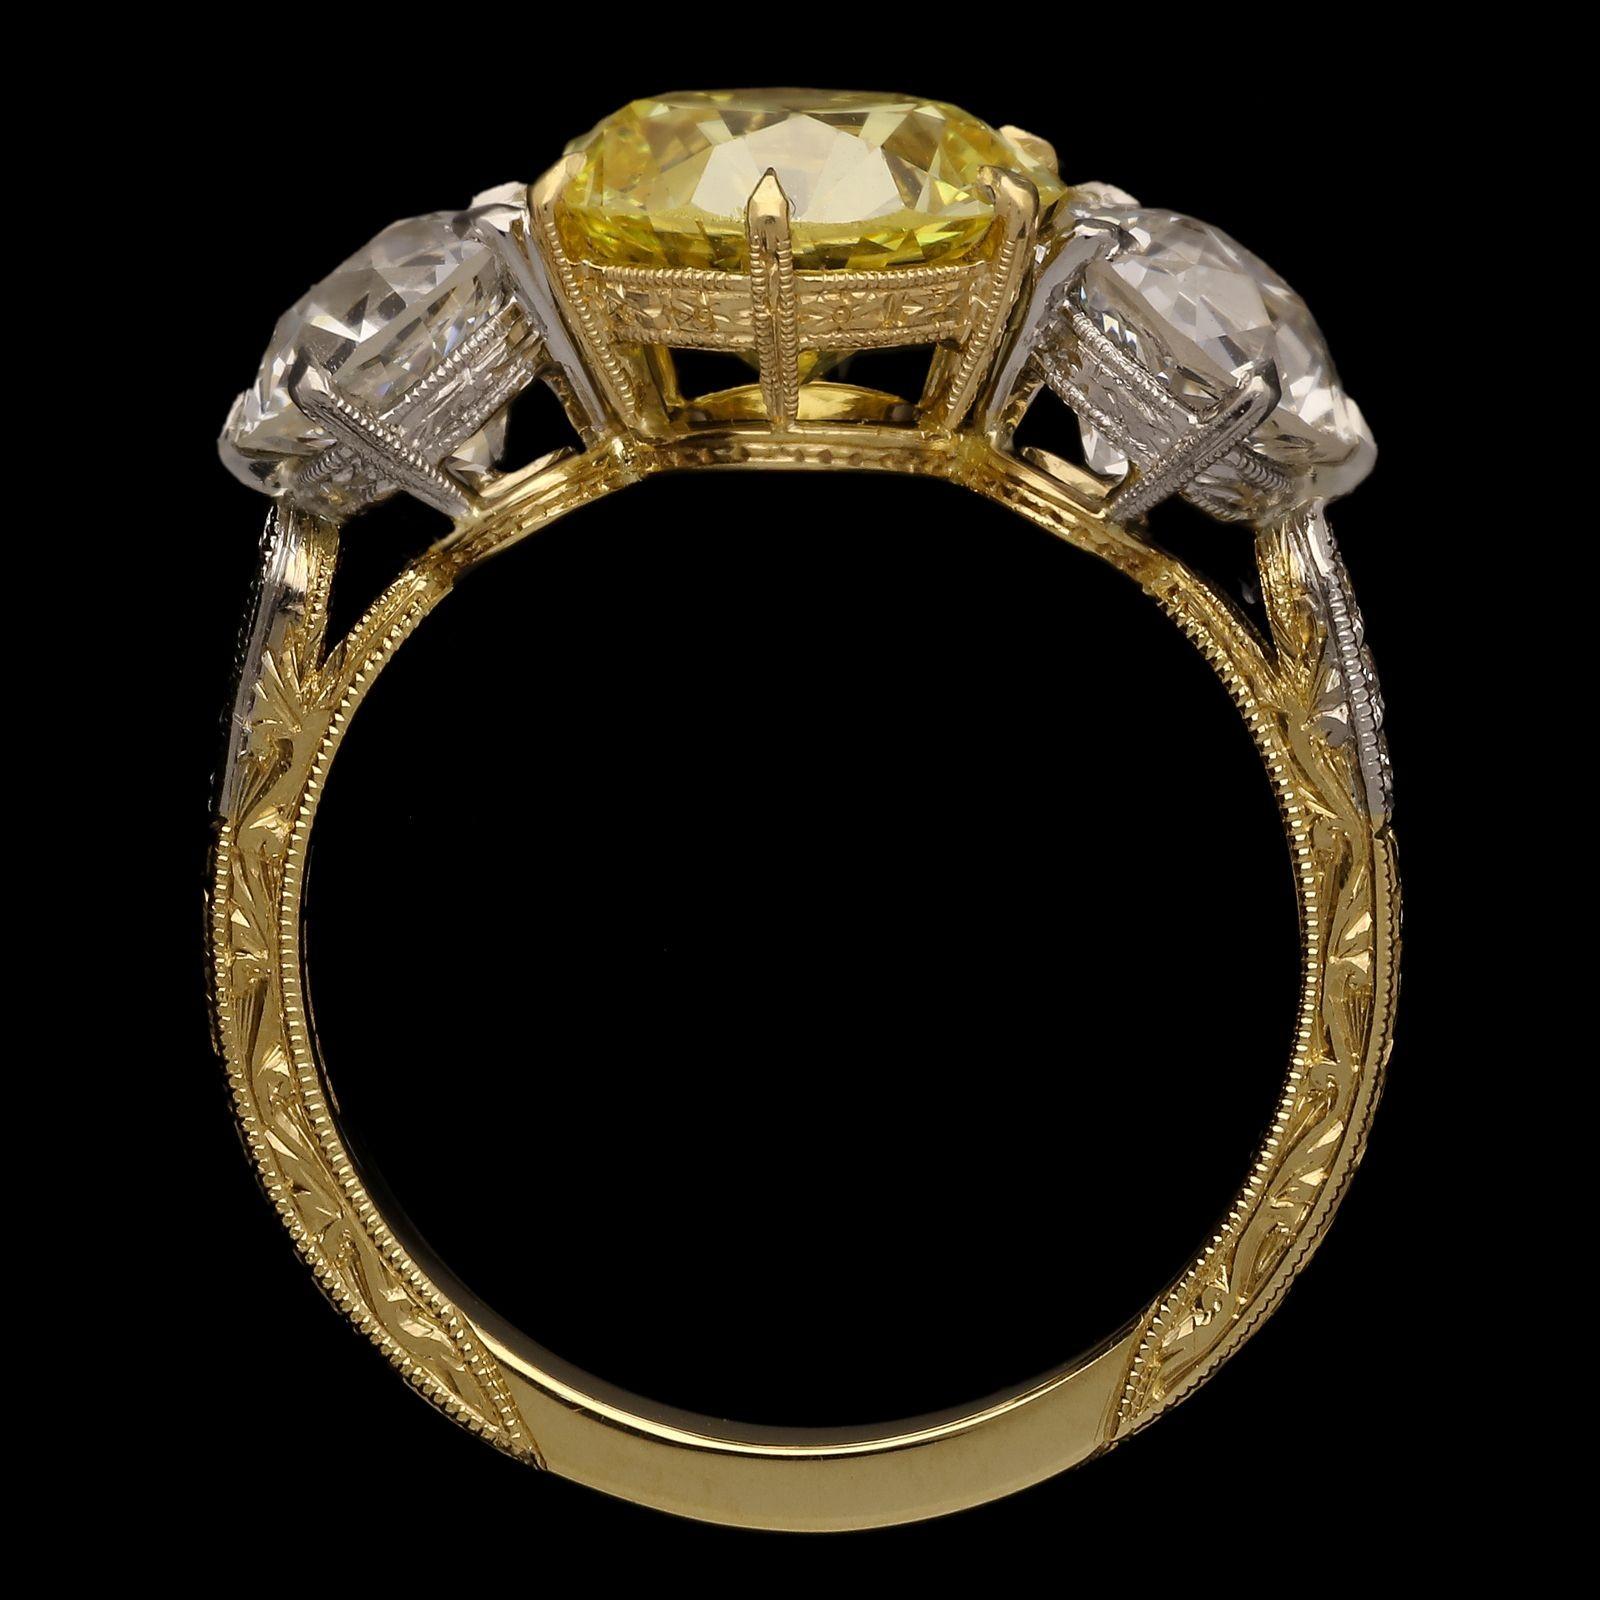 Hancocks 2.41ct Fancy Intense Yellow Diamond Ring Old European Diamond Shoulders In New Condition For Sale In London, GB